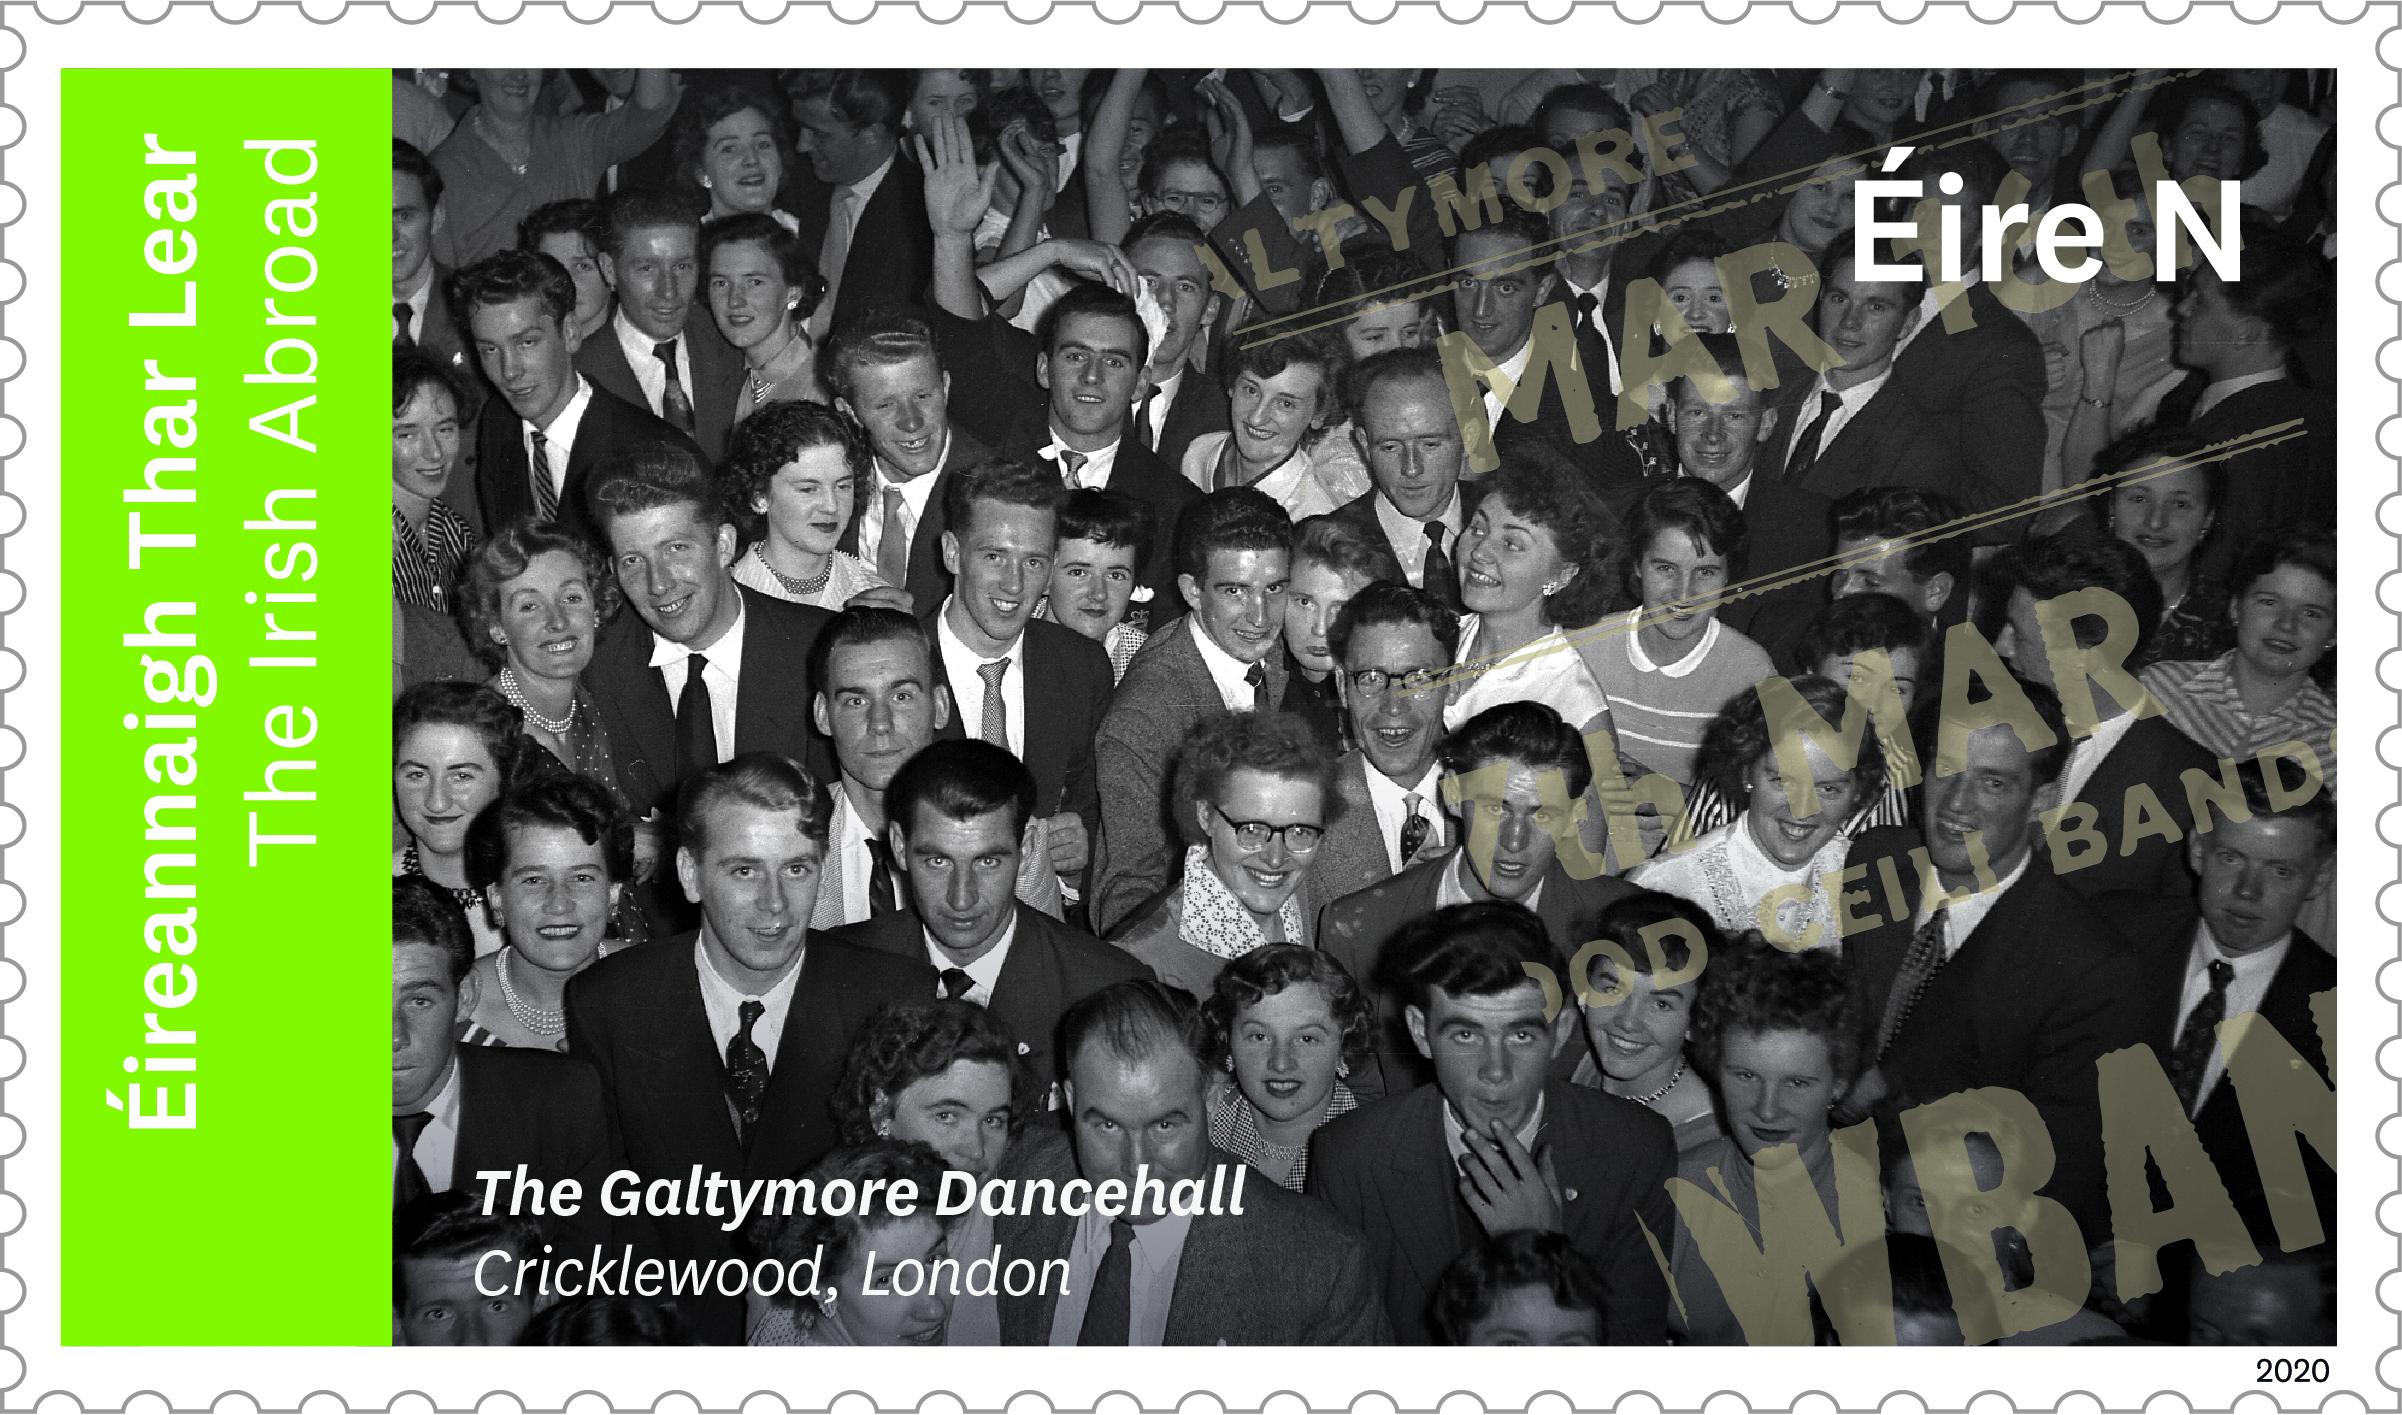 An Post 2020 special edition diaspora postage stamp depicting a London dance hall